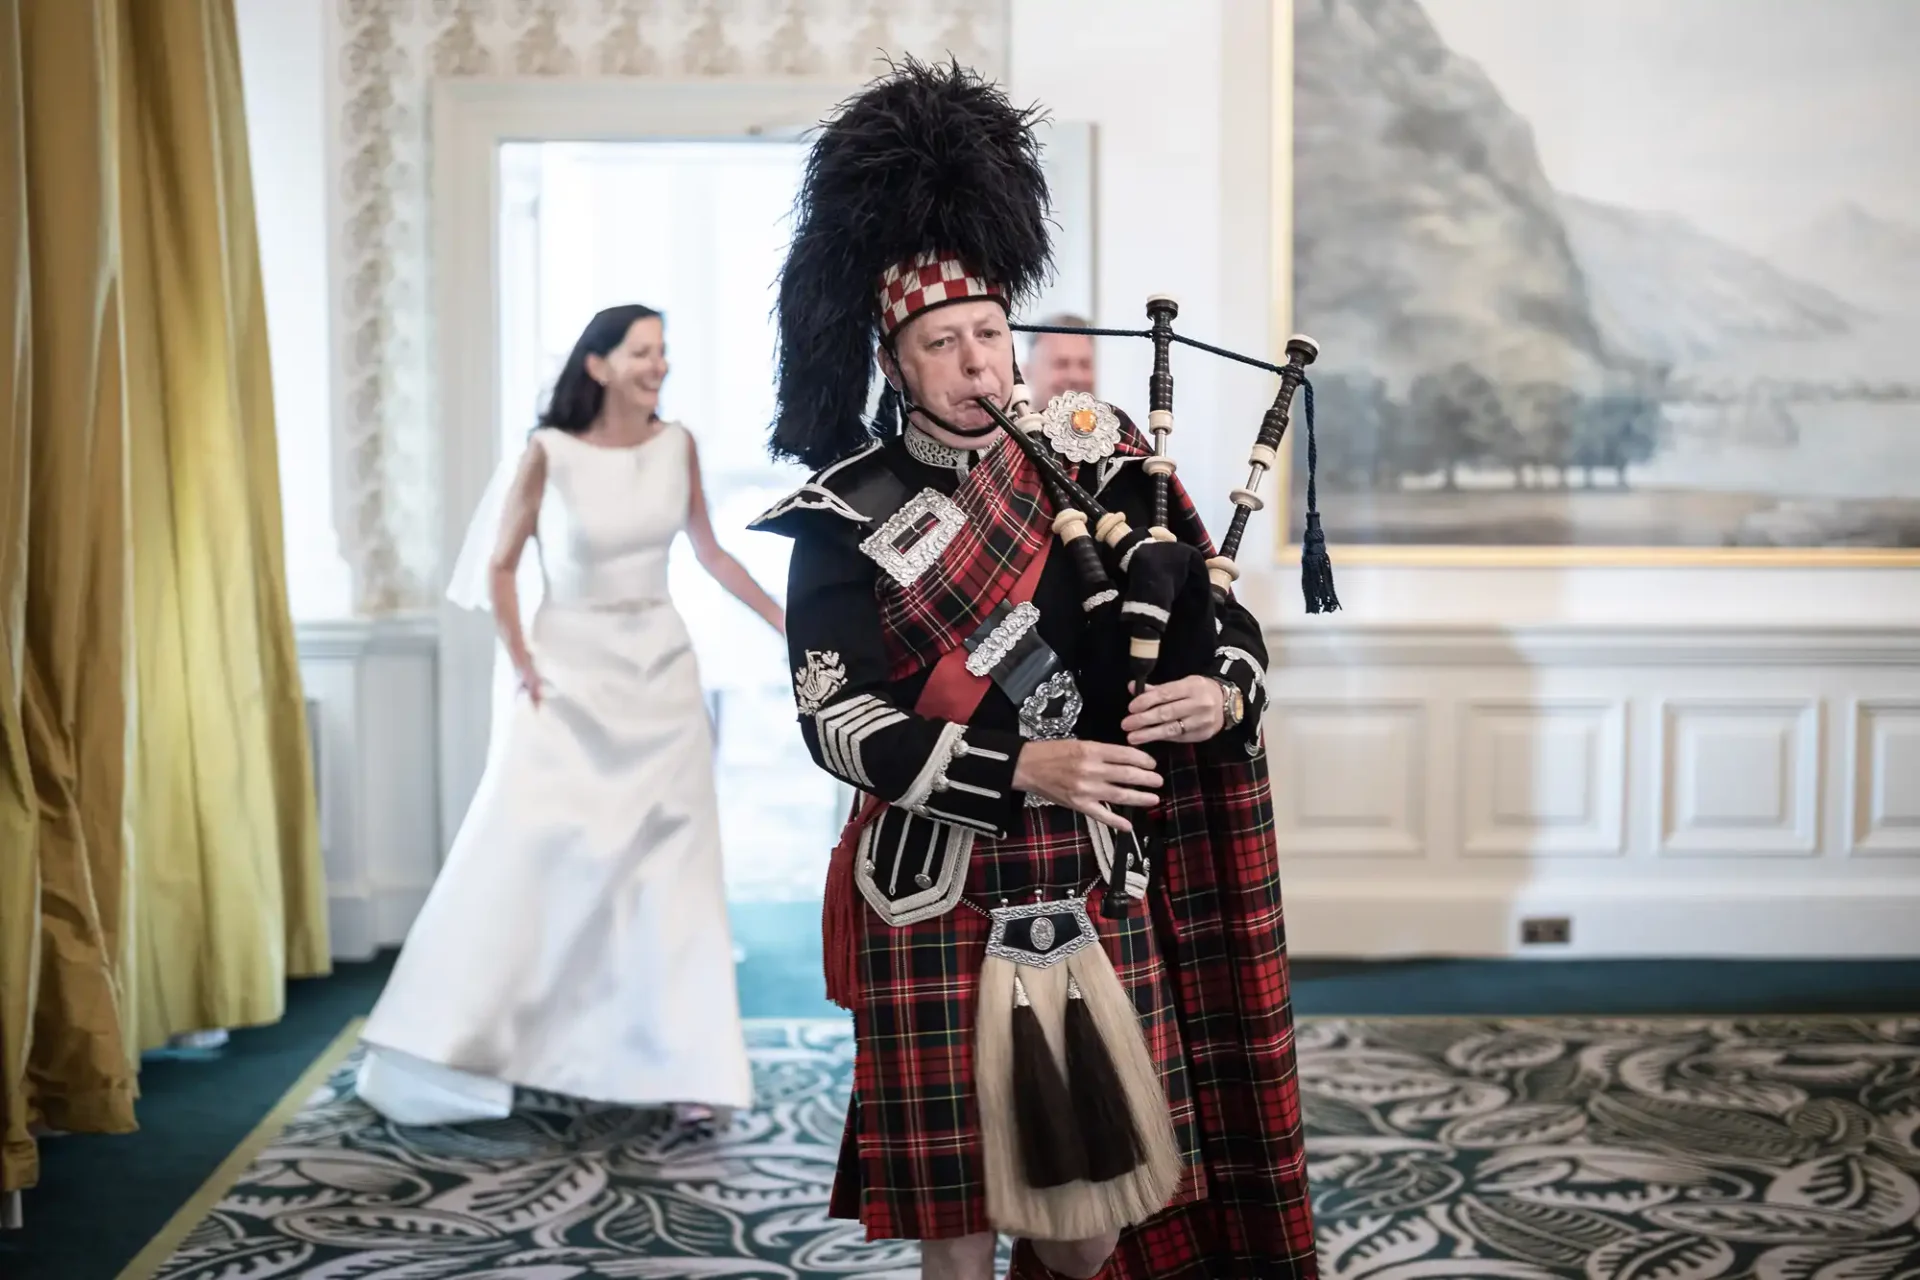 A bagpiper in traditional scottish attire plays while a bride in a white dress smiles in the background in an elegantly decorated room.